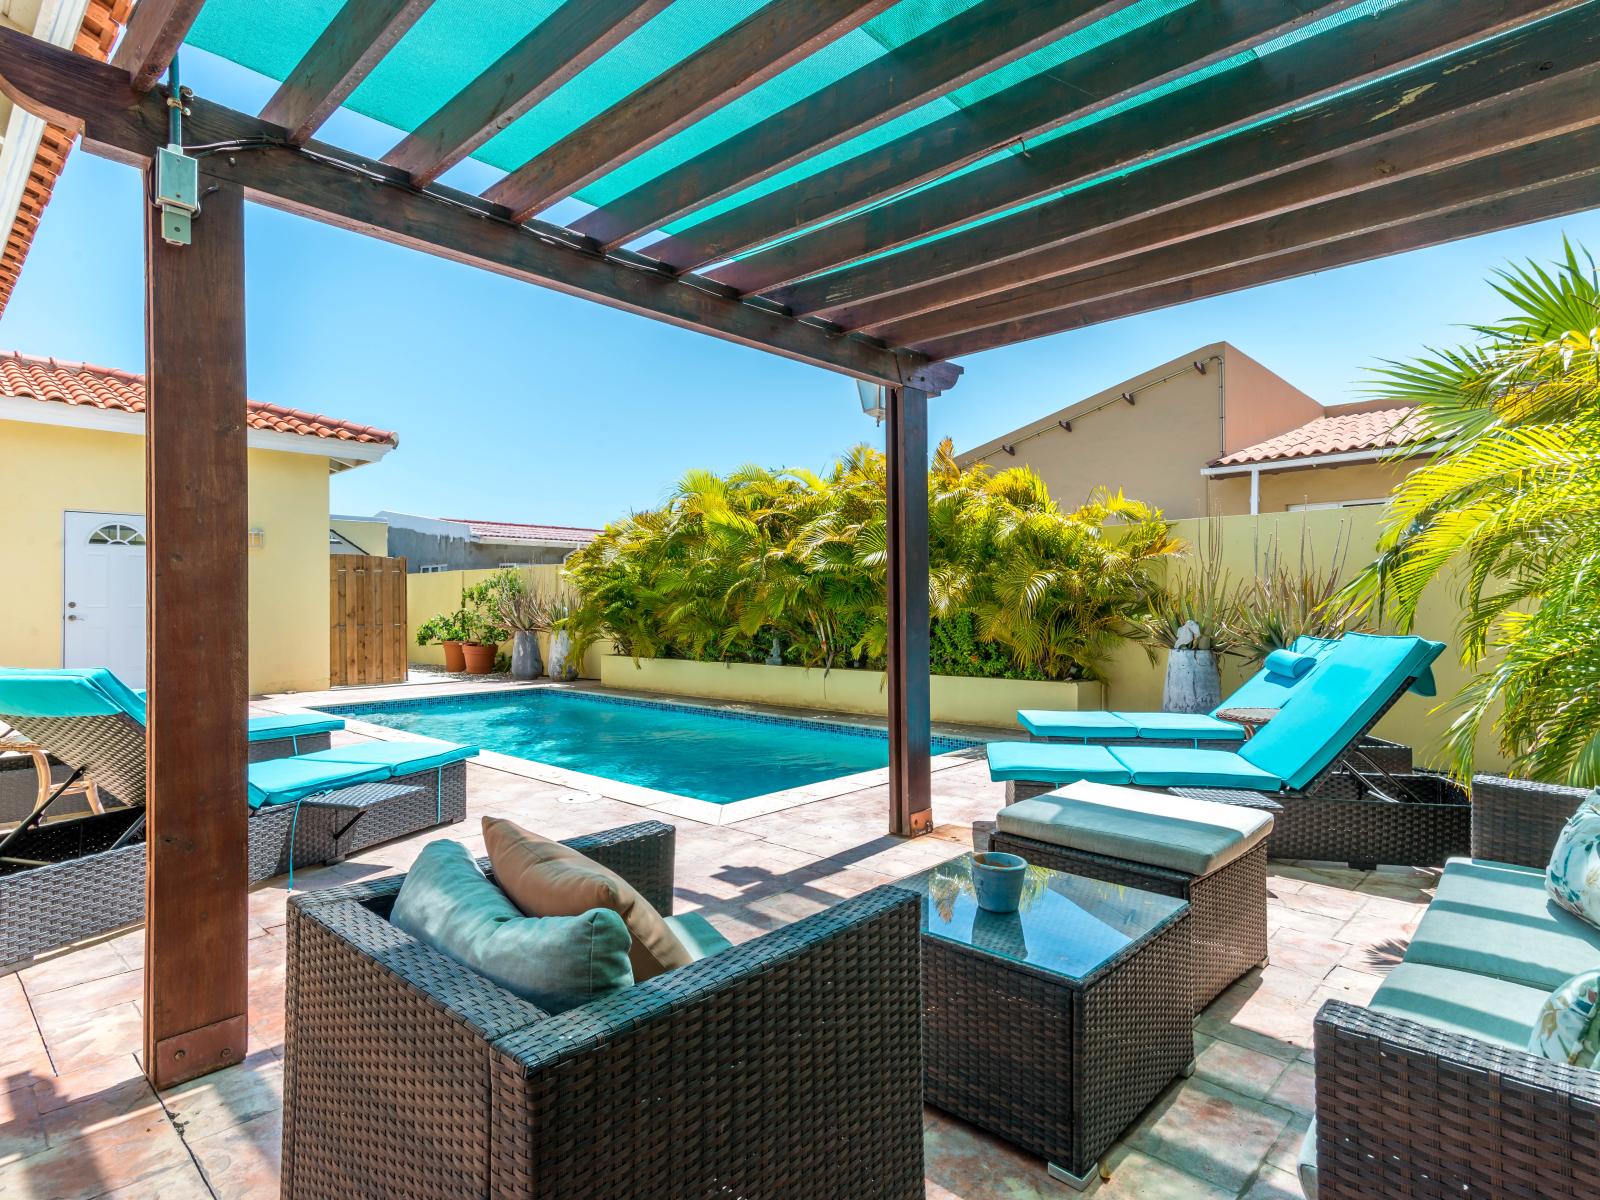 Unwind and relax in the fresh air of cozy outdoor seating of the home in Noord Aruba - Shaded outdoor seating area by the private pool - Create unforgettable memories under the open sky in welcoming outdoor seating setup